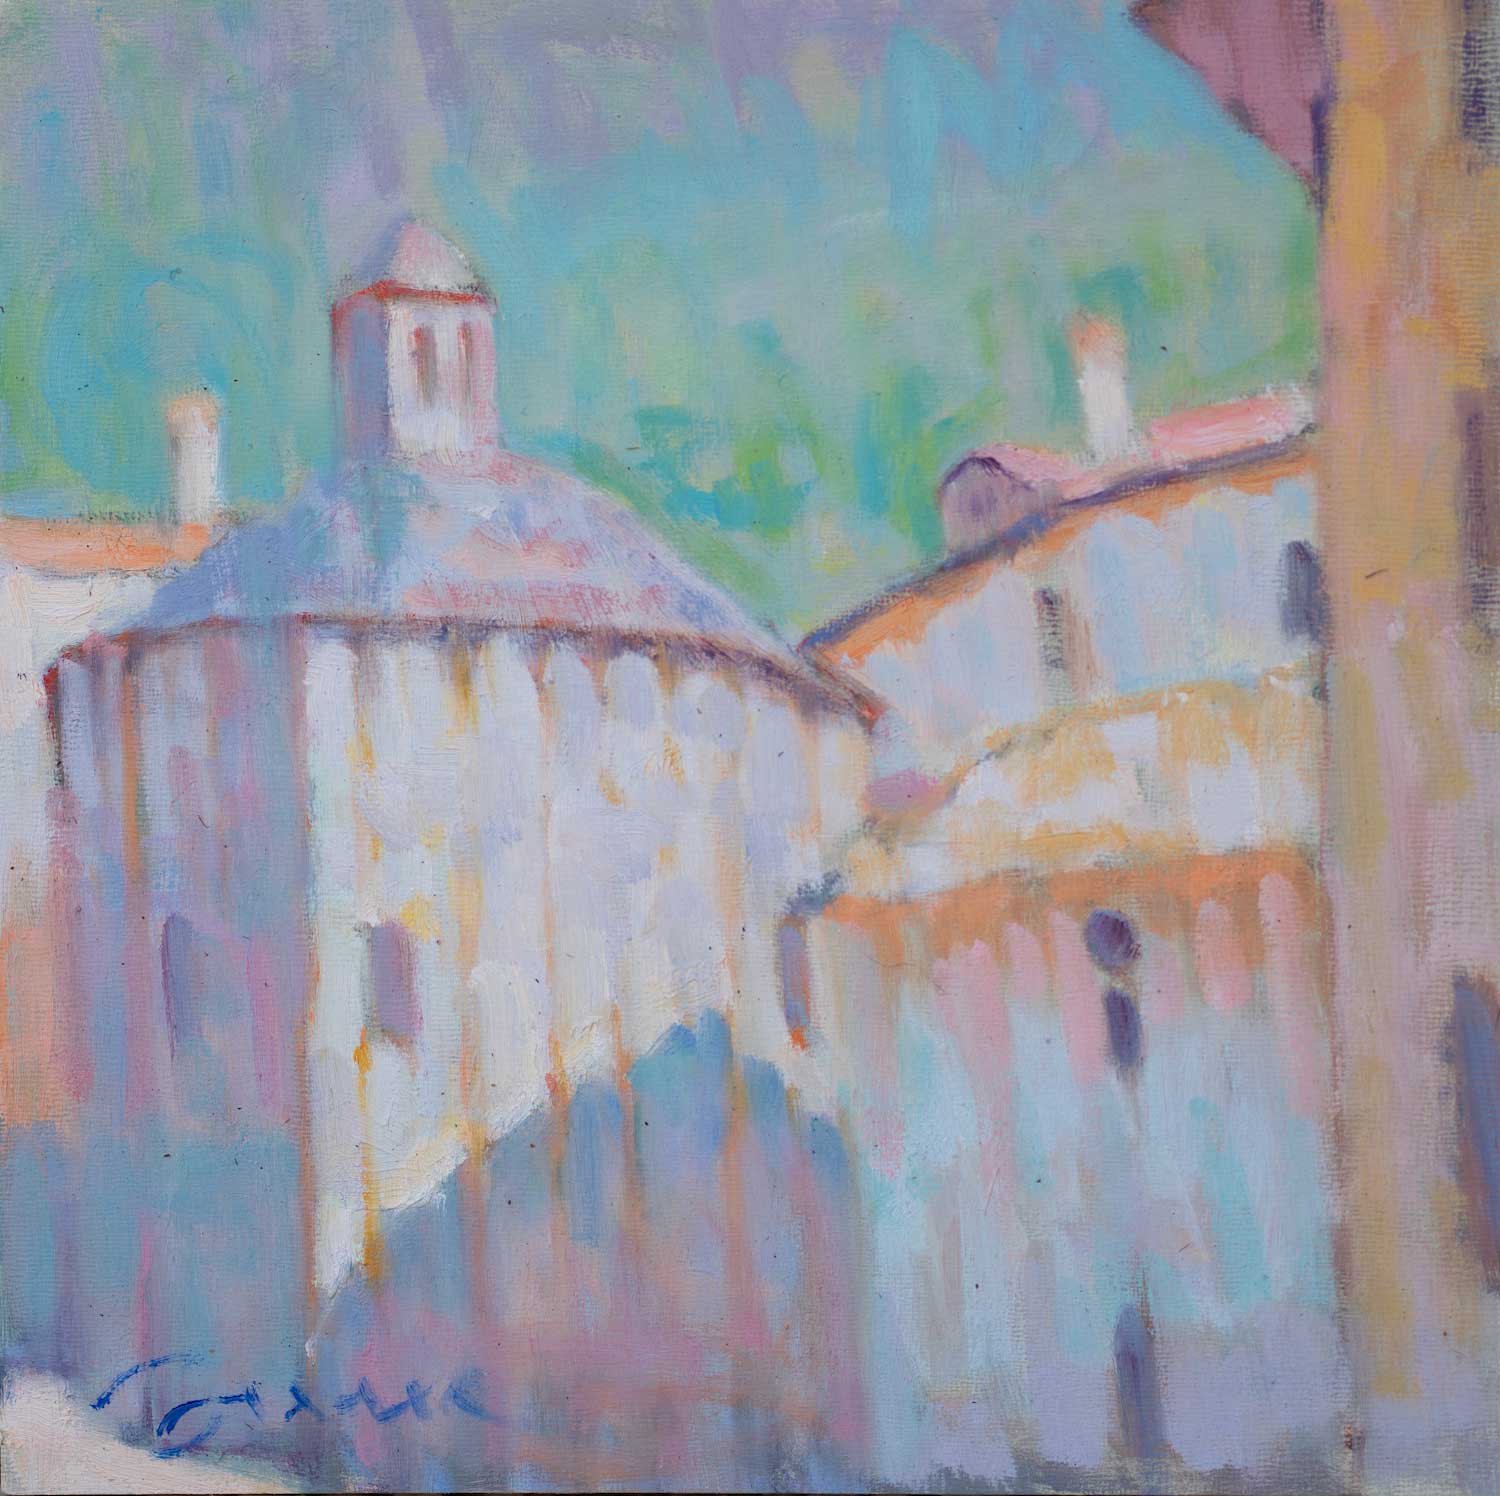 Oil painting of Lenno, Lake Como, Italy, by Jerry Fresia